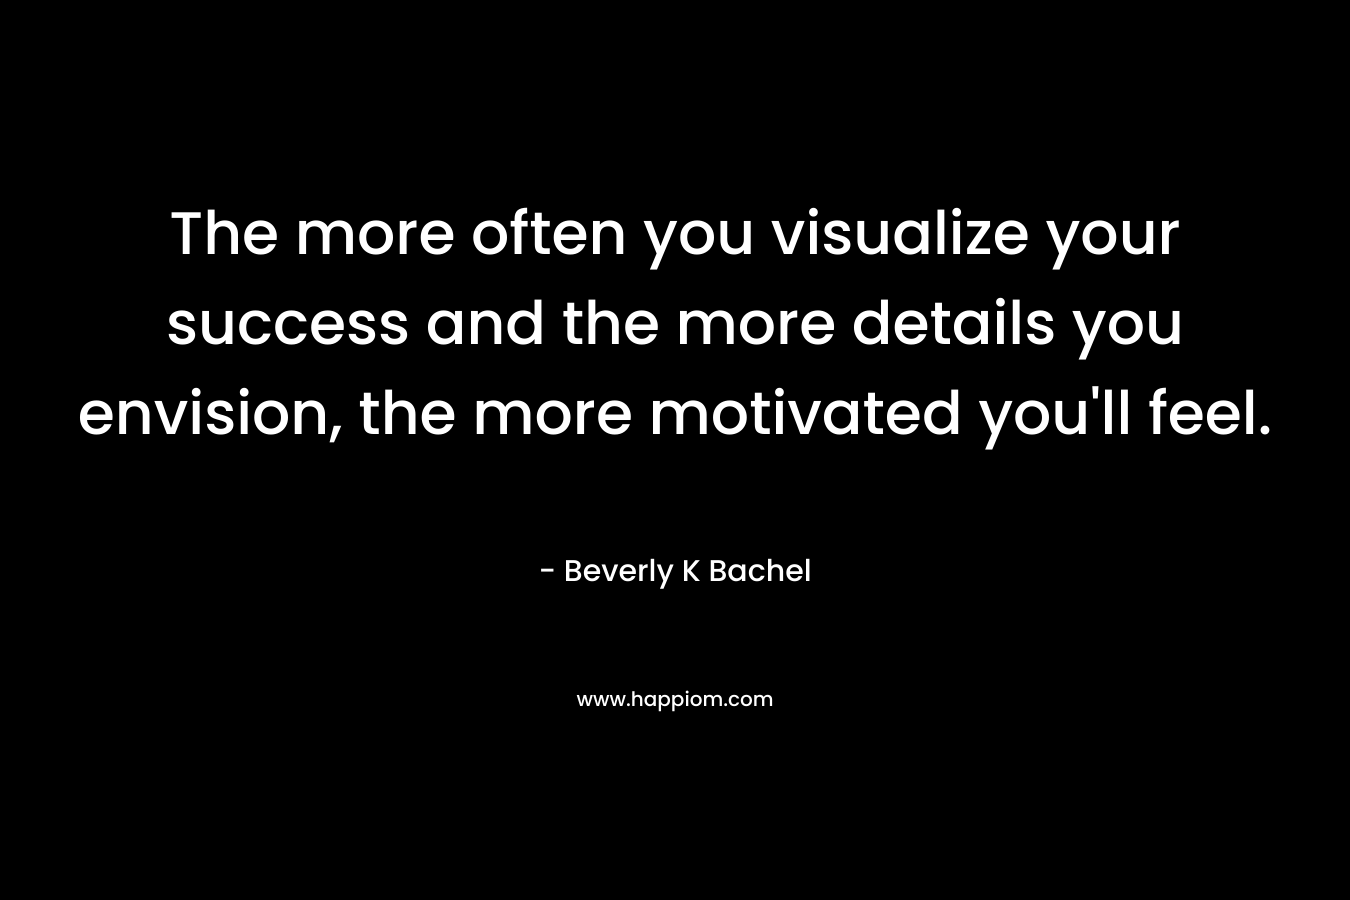 The more often you visualize your success and the more details you envision, the more motivated you'll feel.